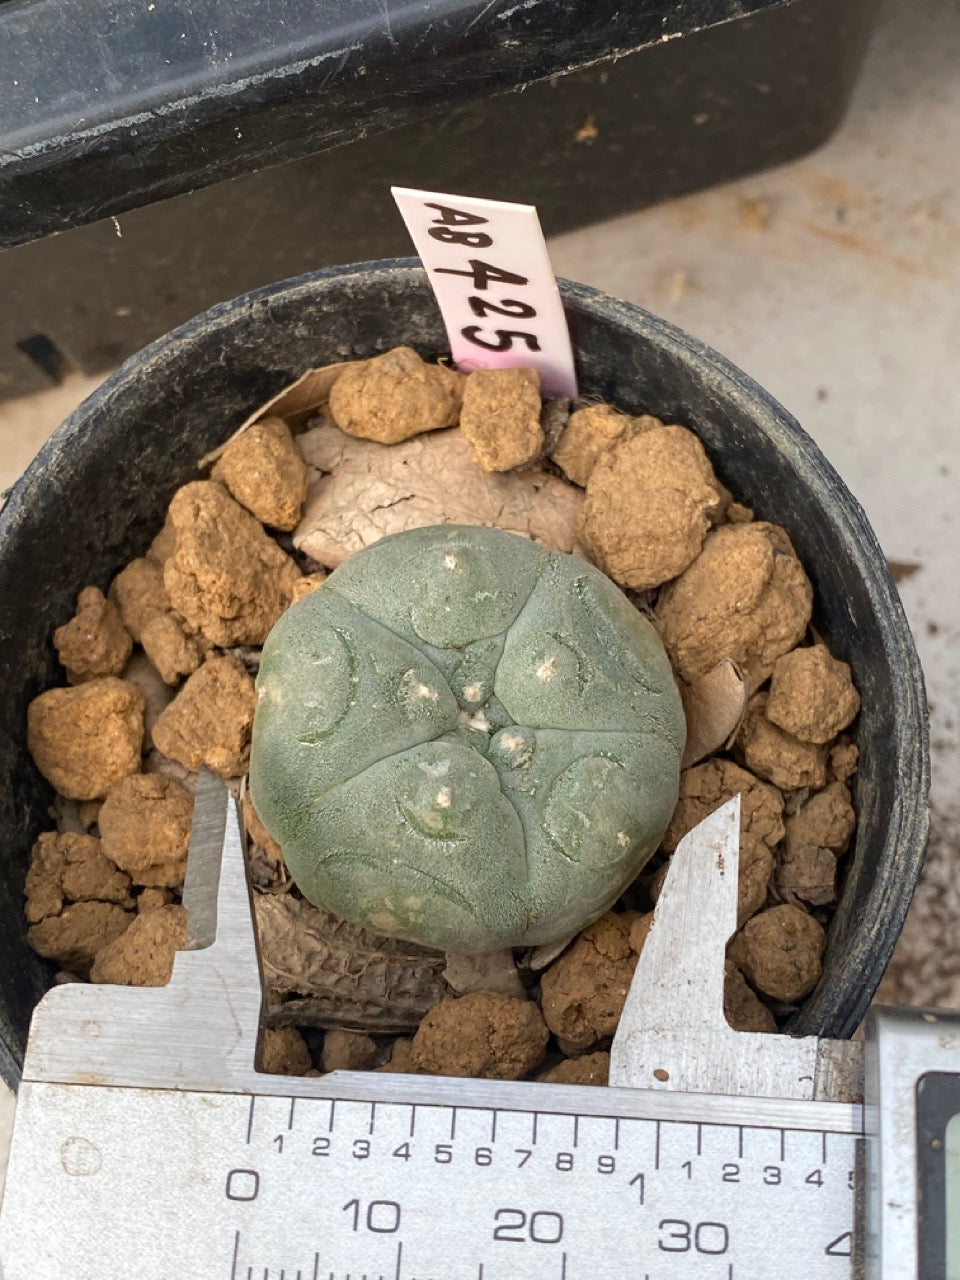 Lophophora williamsii size 3-4 cm own root